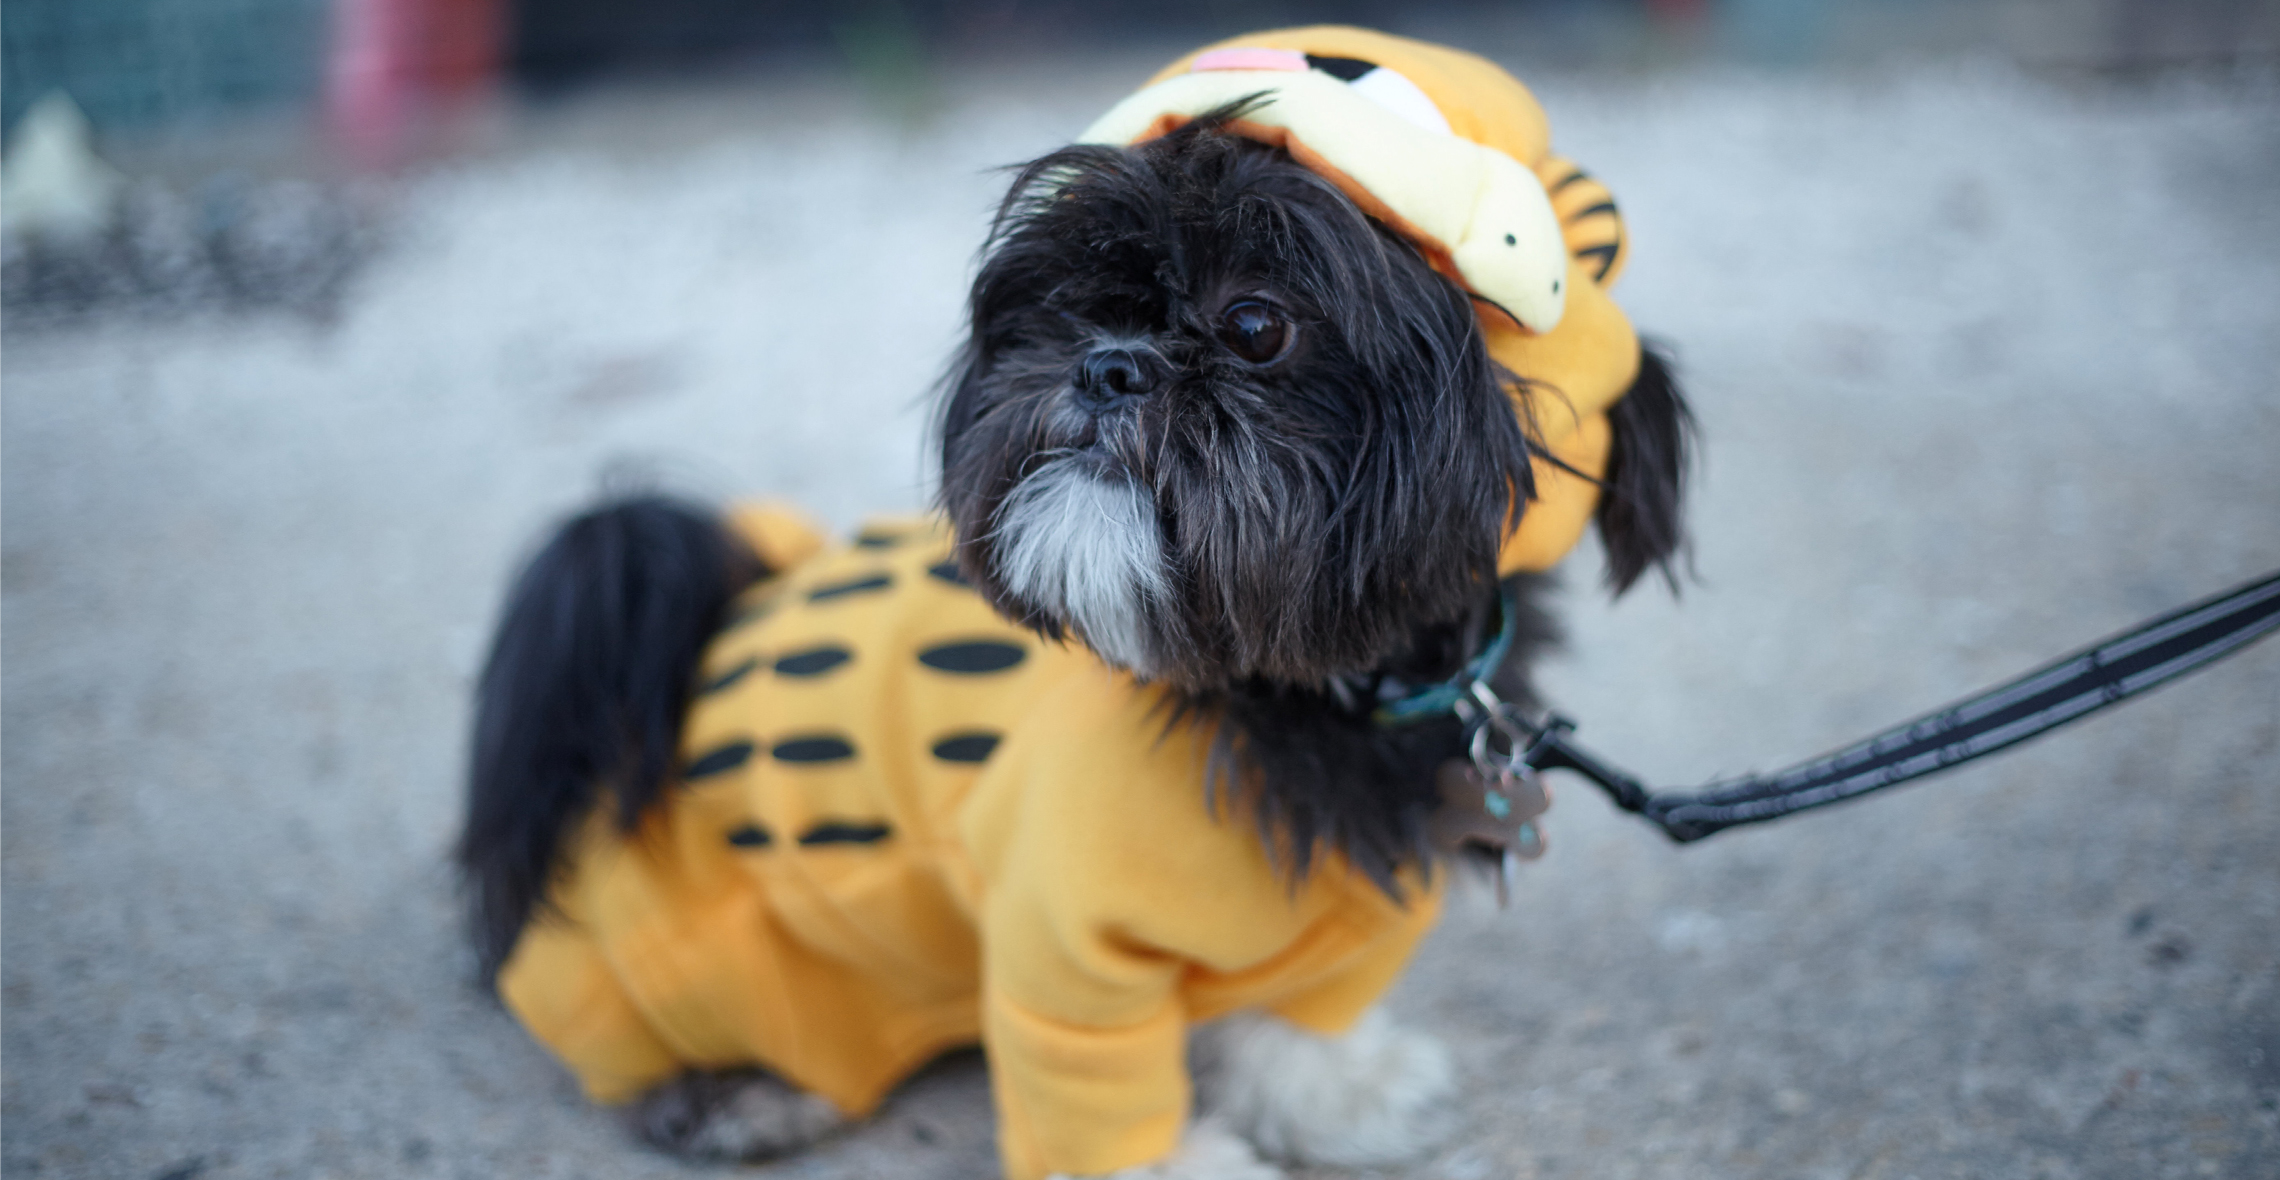 Pet Costume Alterations for Halloween